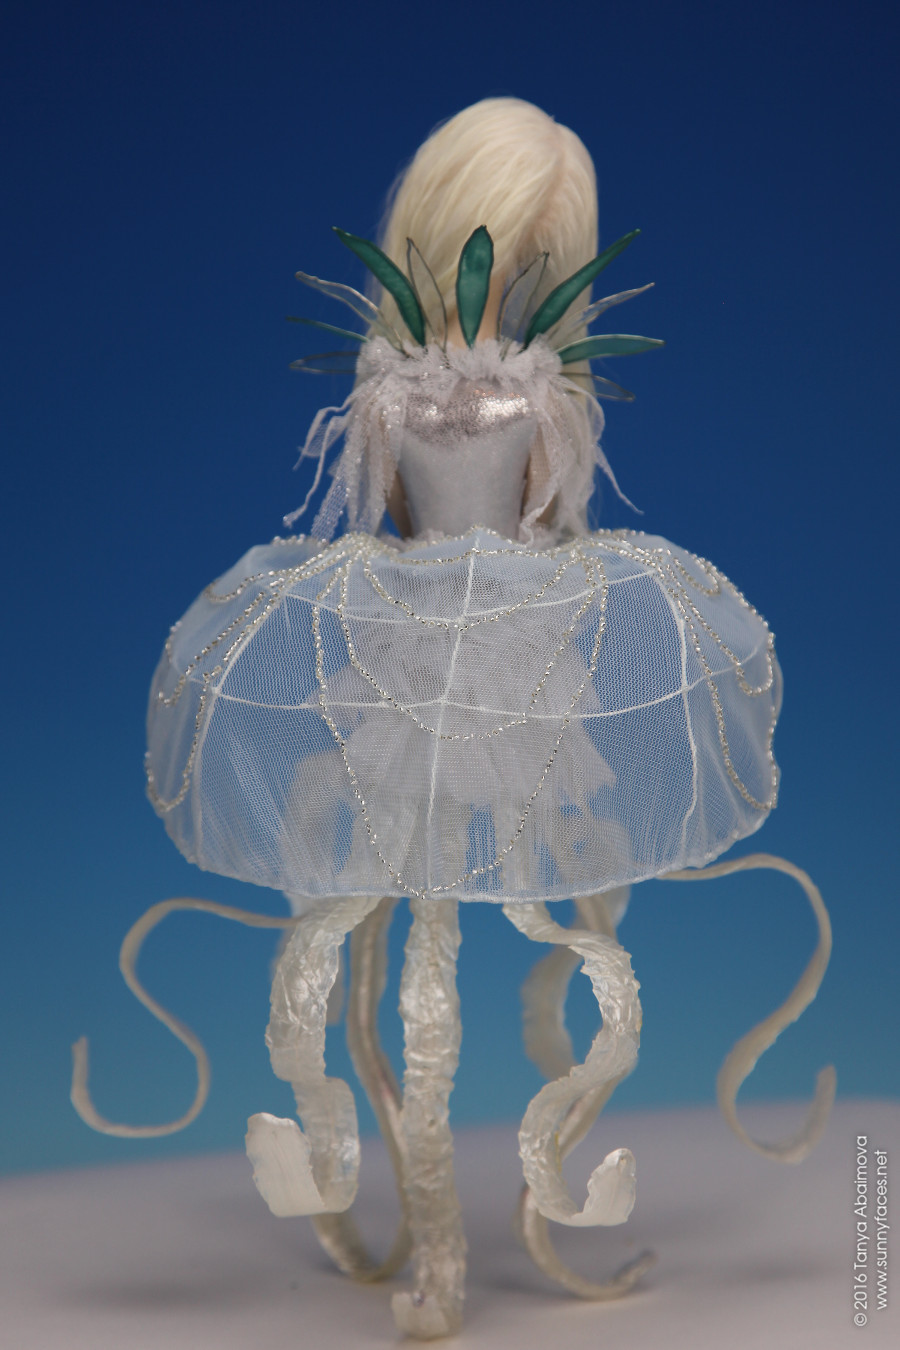 Jelly Fish - One-Of-A-Kind Doll by Tanya Abaimova. Creatures Gallery 